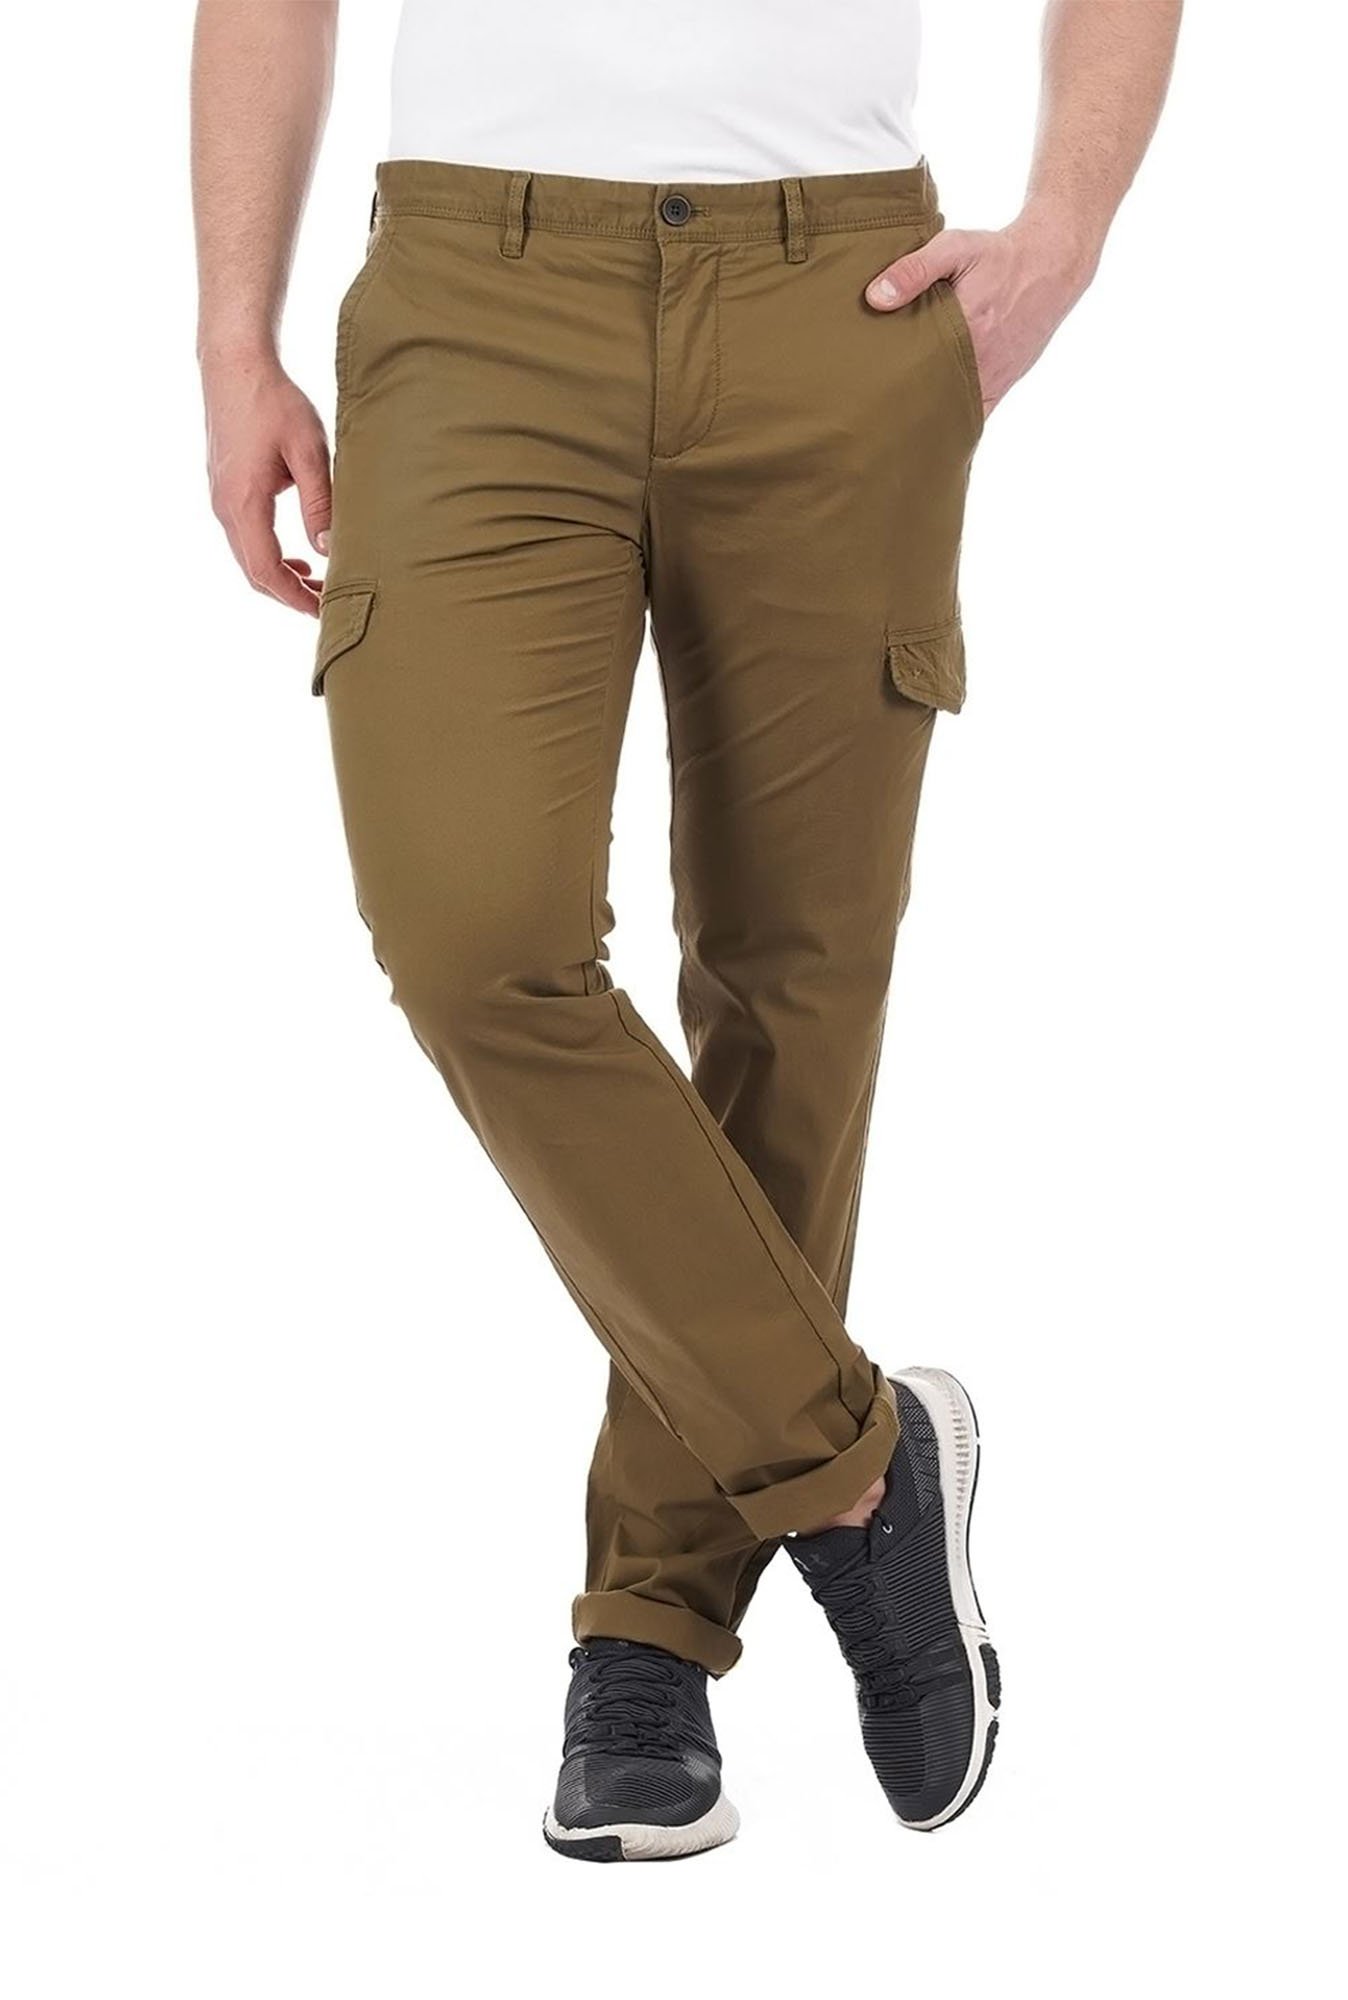 Buy Brown Trousers  Pants for Men by The Indian Garage Co Online  Ajiocom